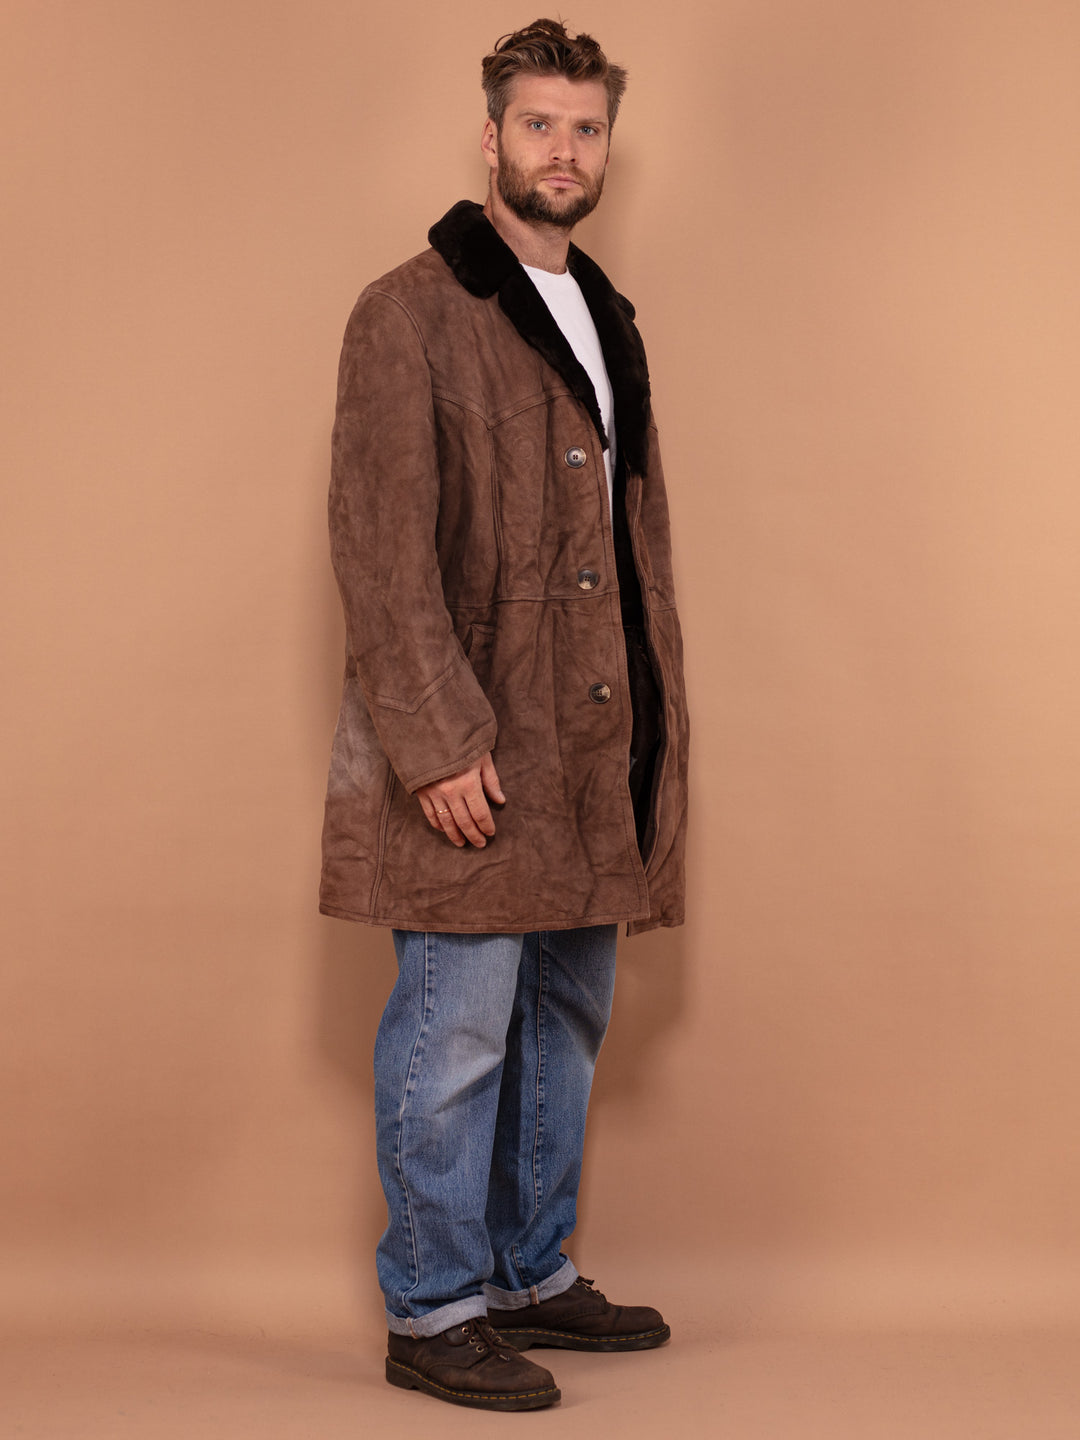 Men Classic Shearling Coat 70's, Size Large, Vintage Sheepskin Outerwear, Brown Suede Overcoat, Retro Winter Coat, Timeless Classic Coat